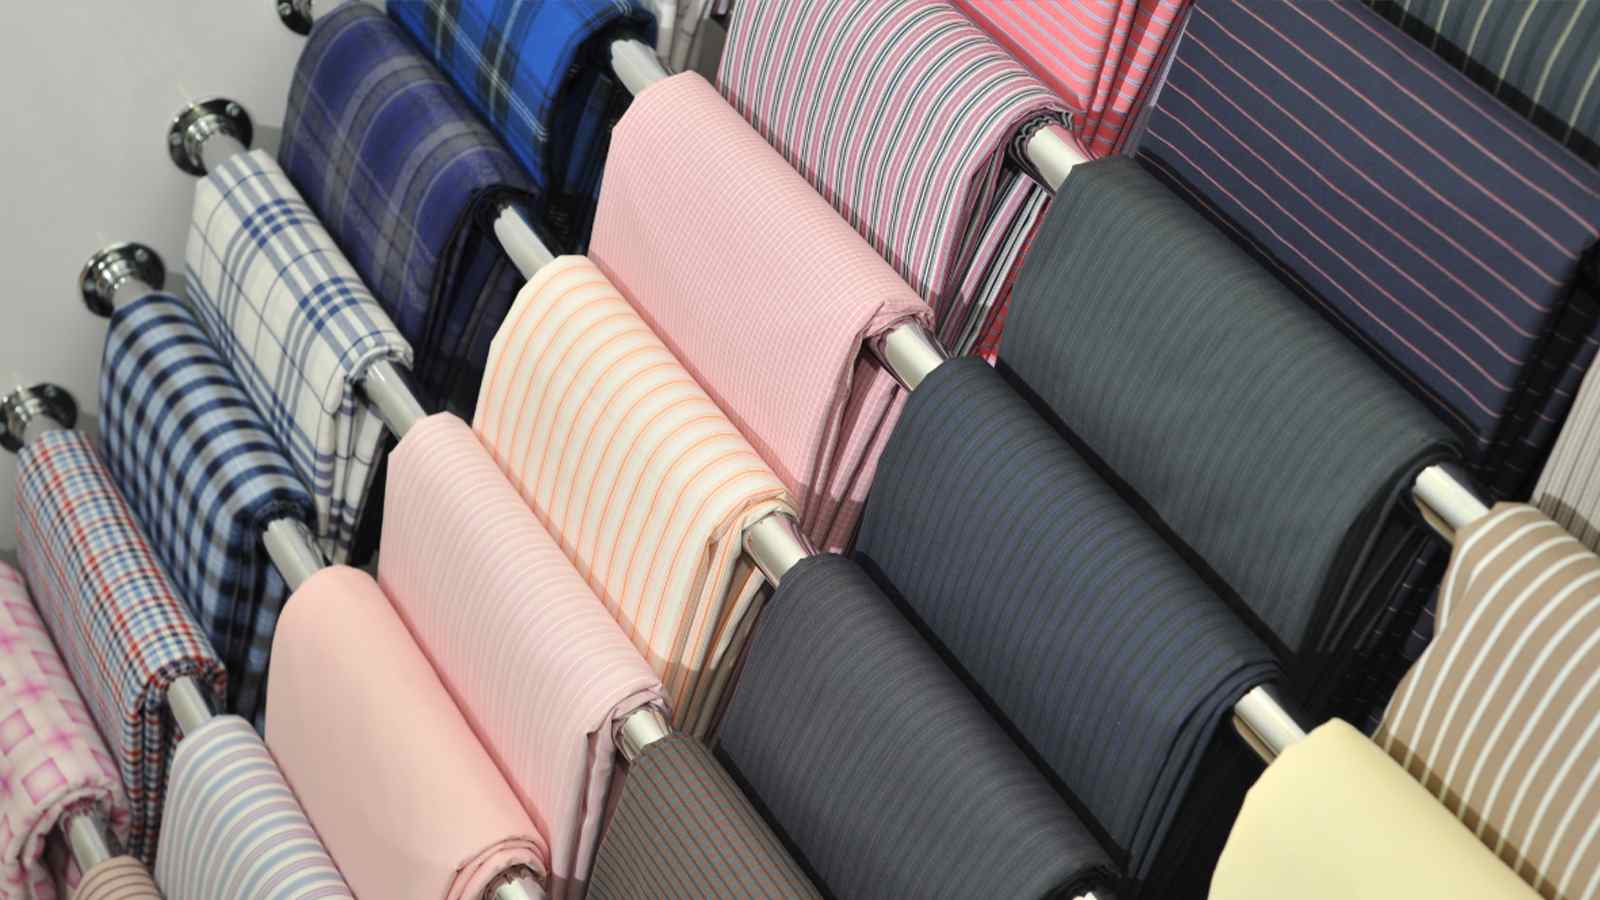 A row of different colored fabris on a rack.